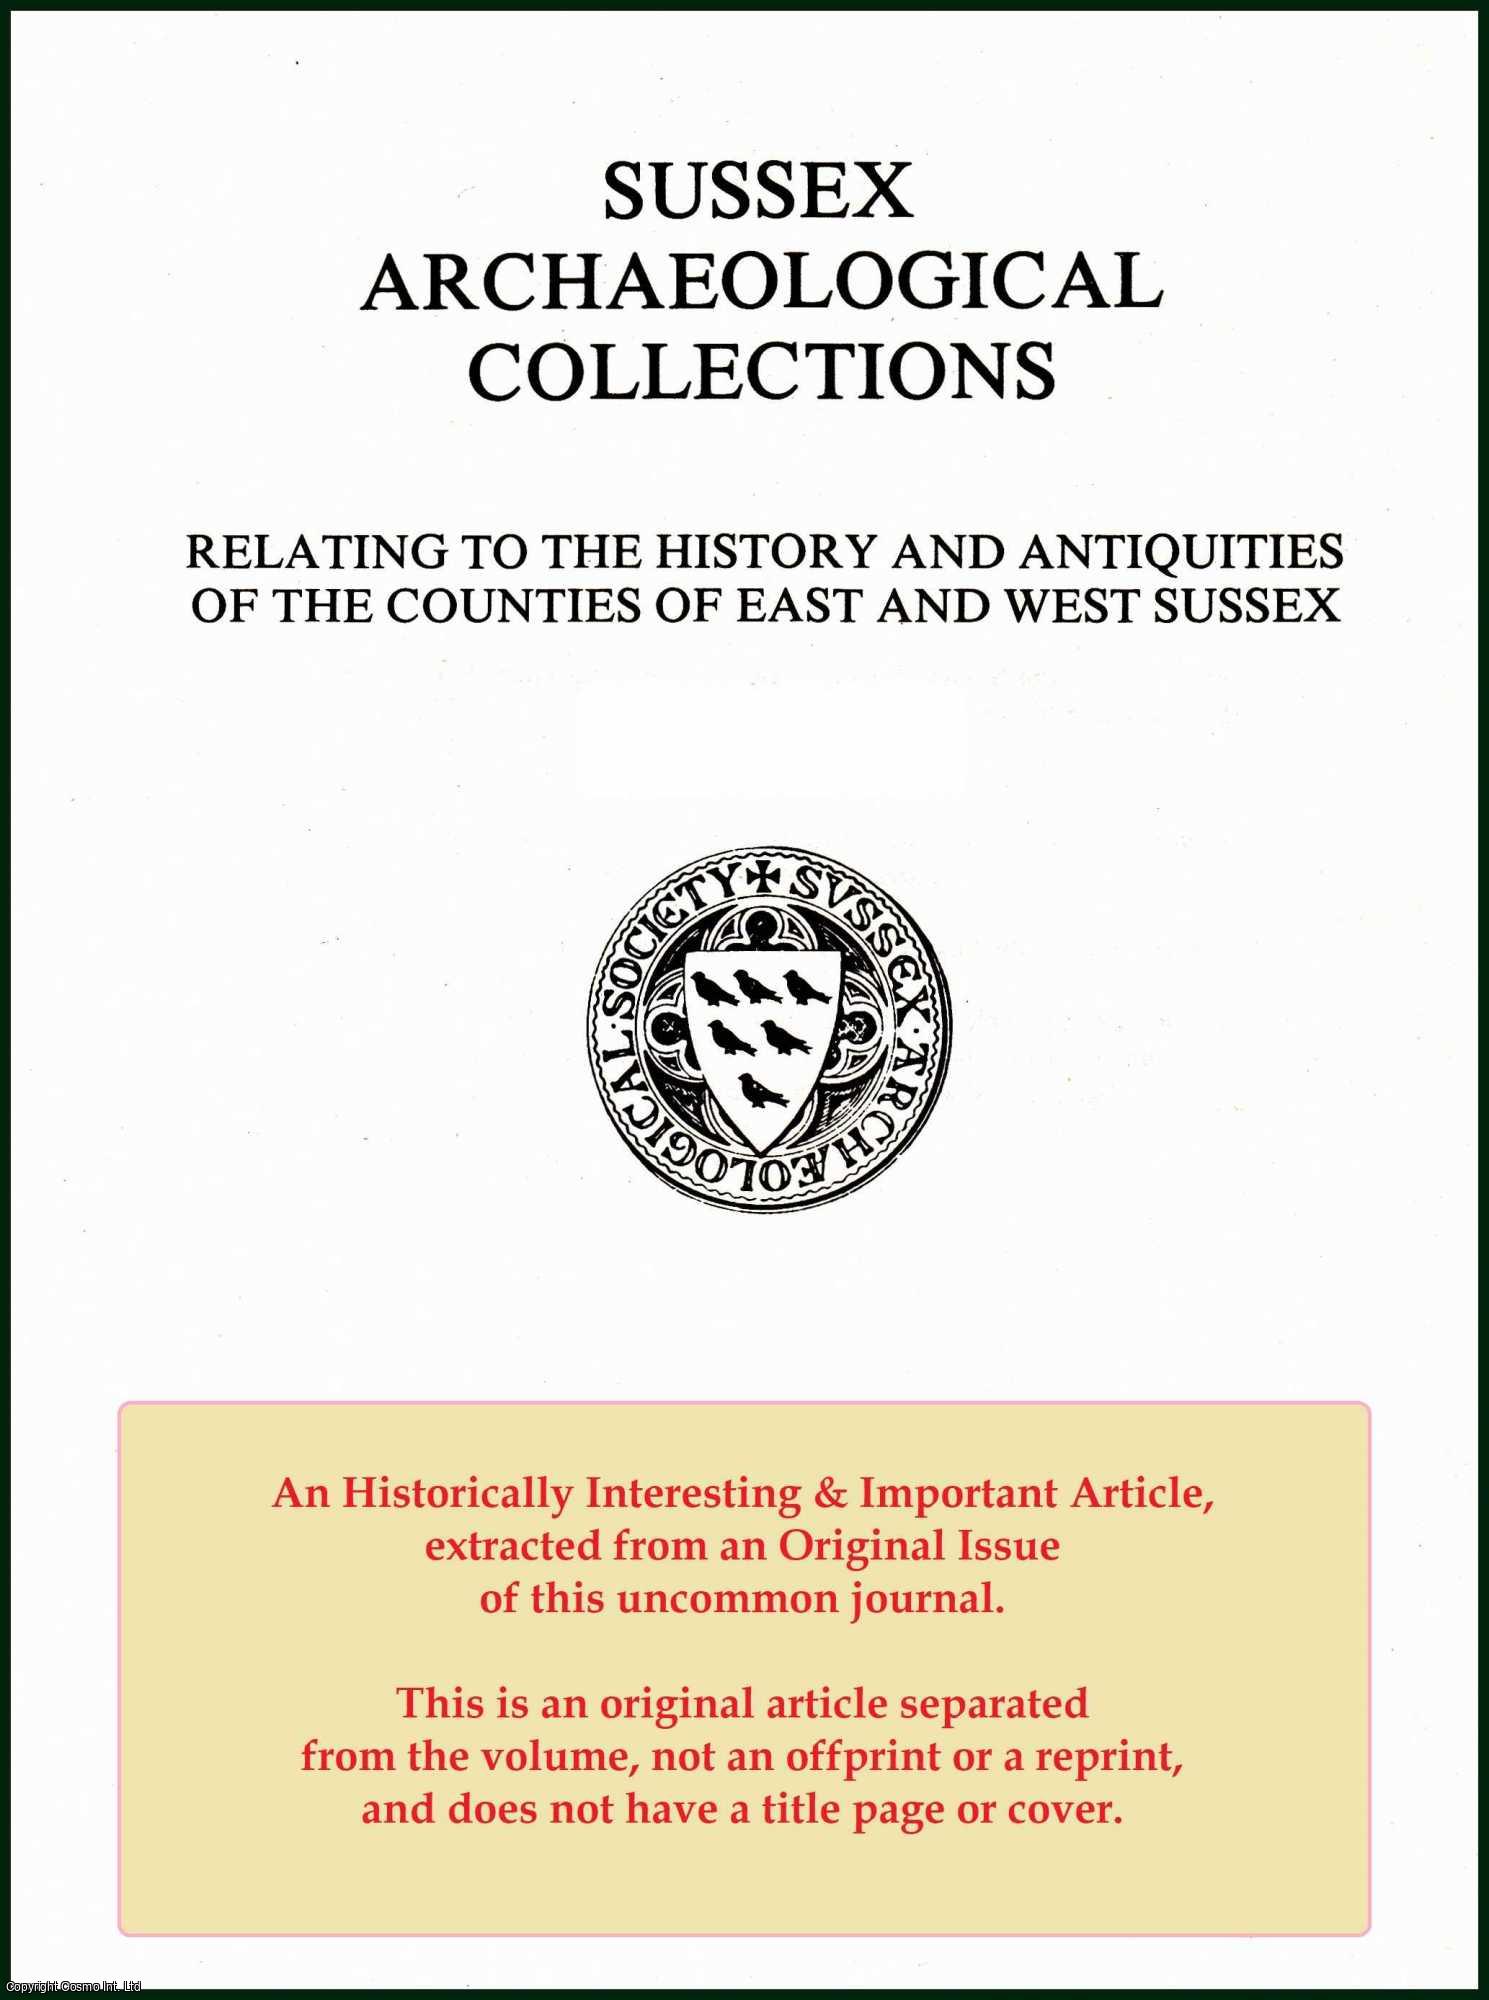 --- - The Collection and Printing of Records Relating to The History of The County. An original article from the Journal of the Sussex Archaeological Society, 1878.